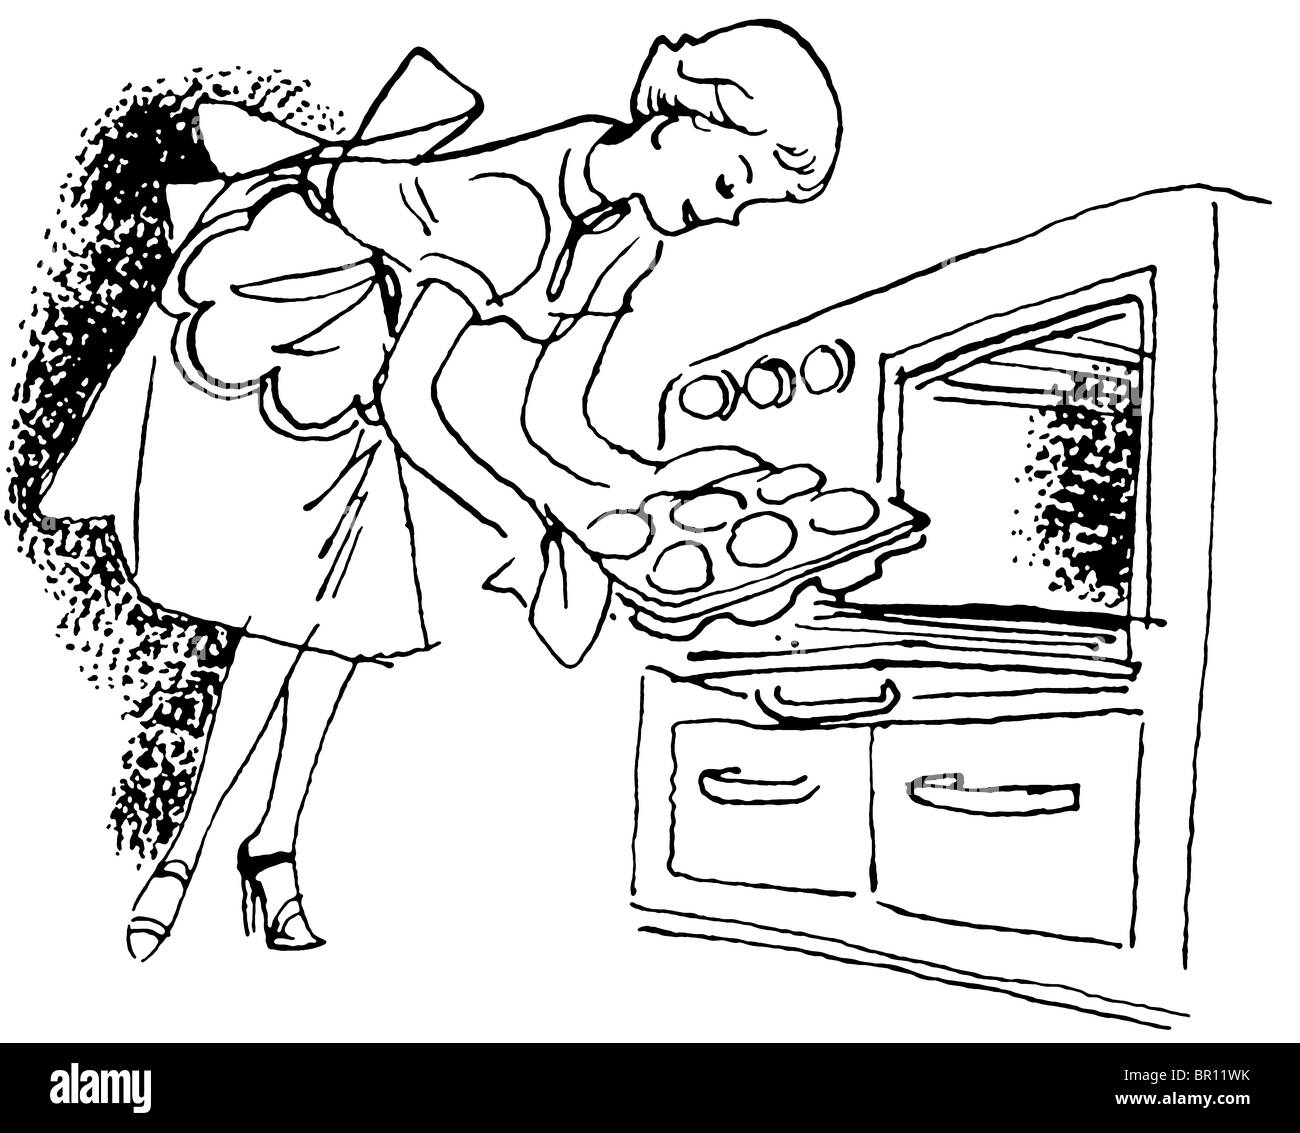 A black and white version of a vintage illustration of a woman removing buns from the oven Stock Photo